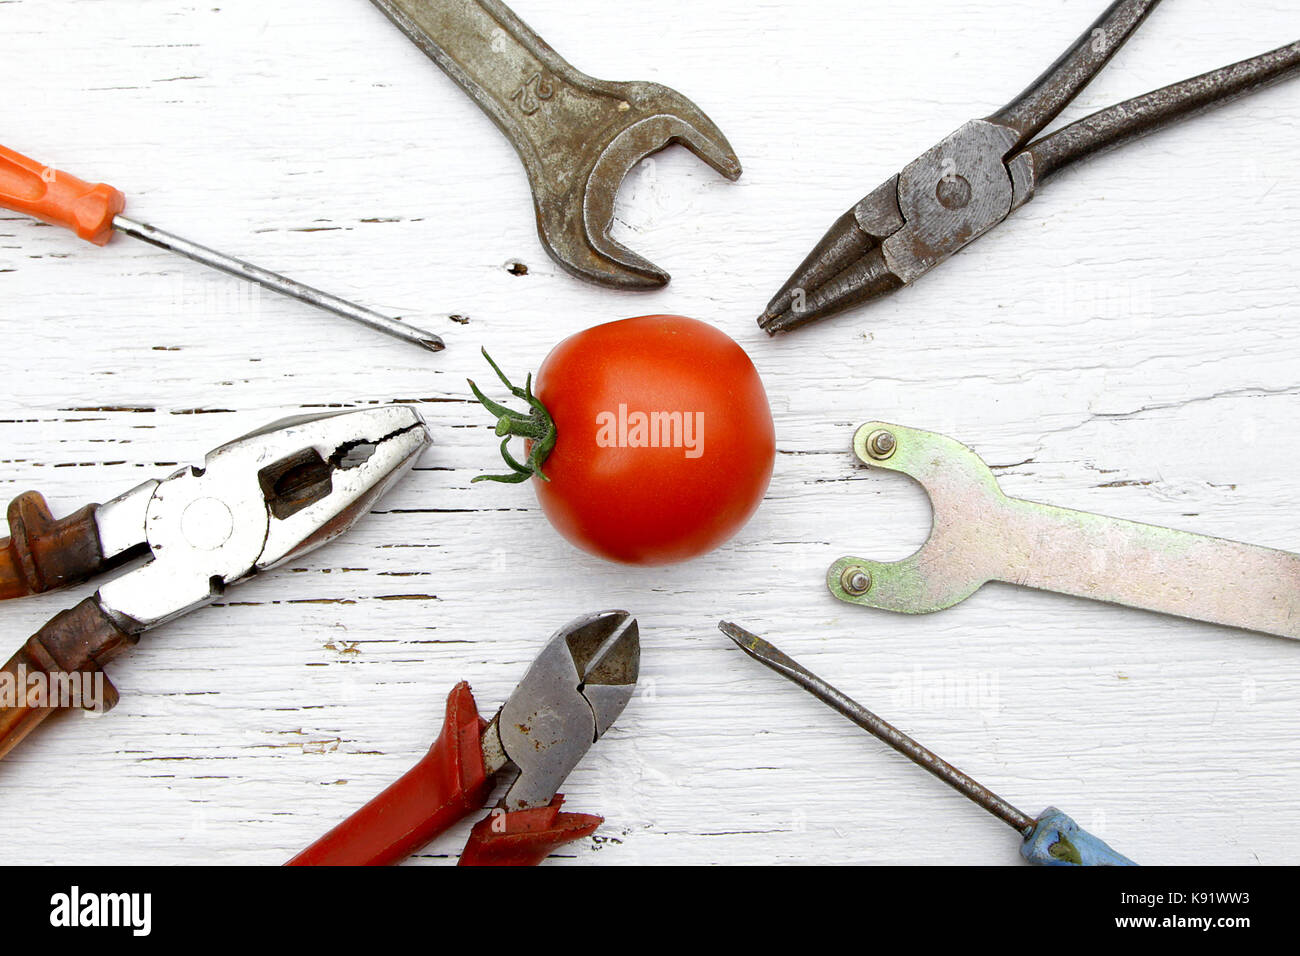 saying if it ain't broke, don't fix it metaphor with whole tomato and tools Stock Photo